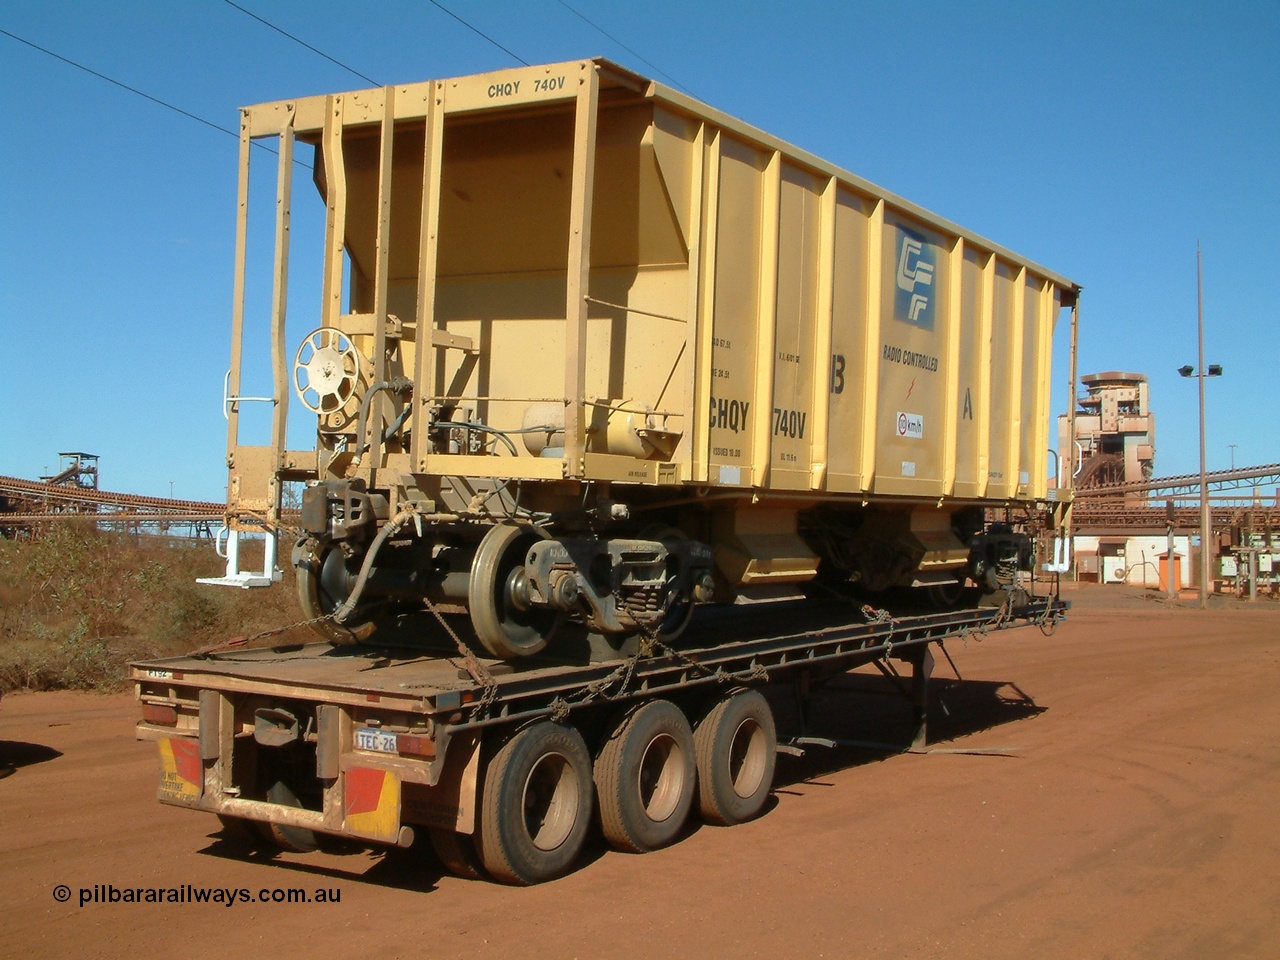 040814 092238
Nelson Point, CFCLA ballast waggon CHQY type 740 just being delivered to BHP Iron Ore as part of the Rail PACE project.
Keywords: CHQY-type;CHQY740;CFCLA;CRDX-type;BHP-ballast-waggon;